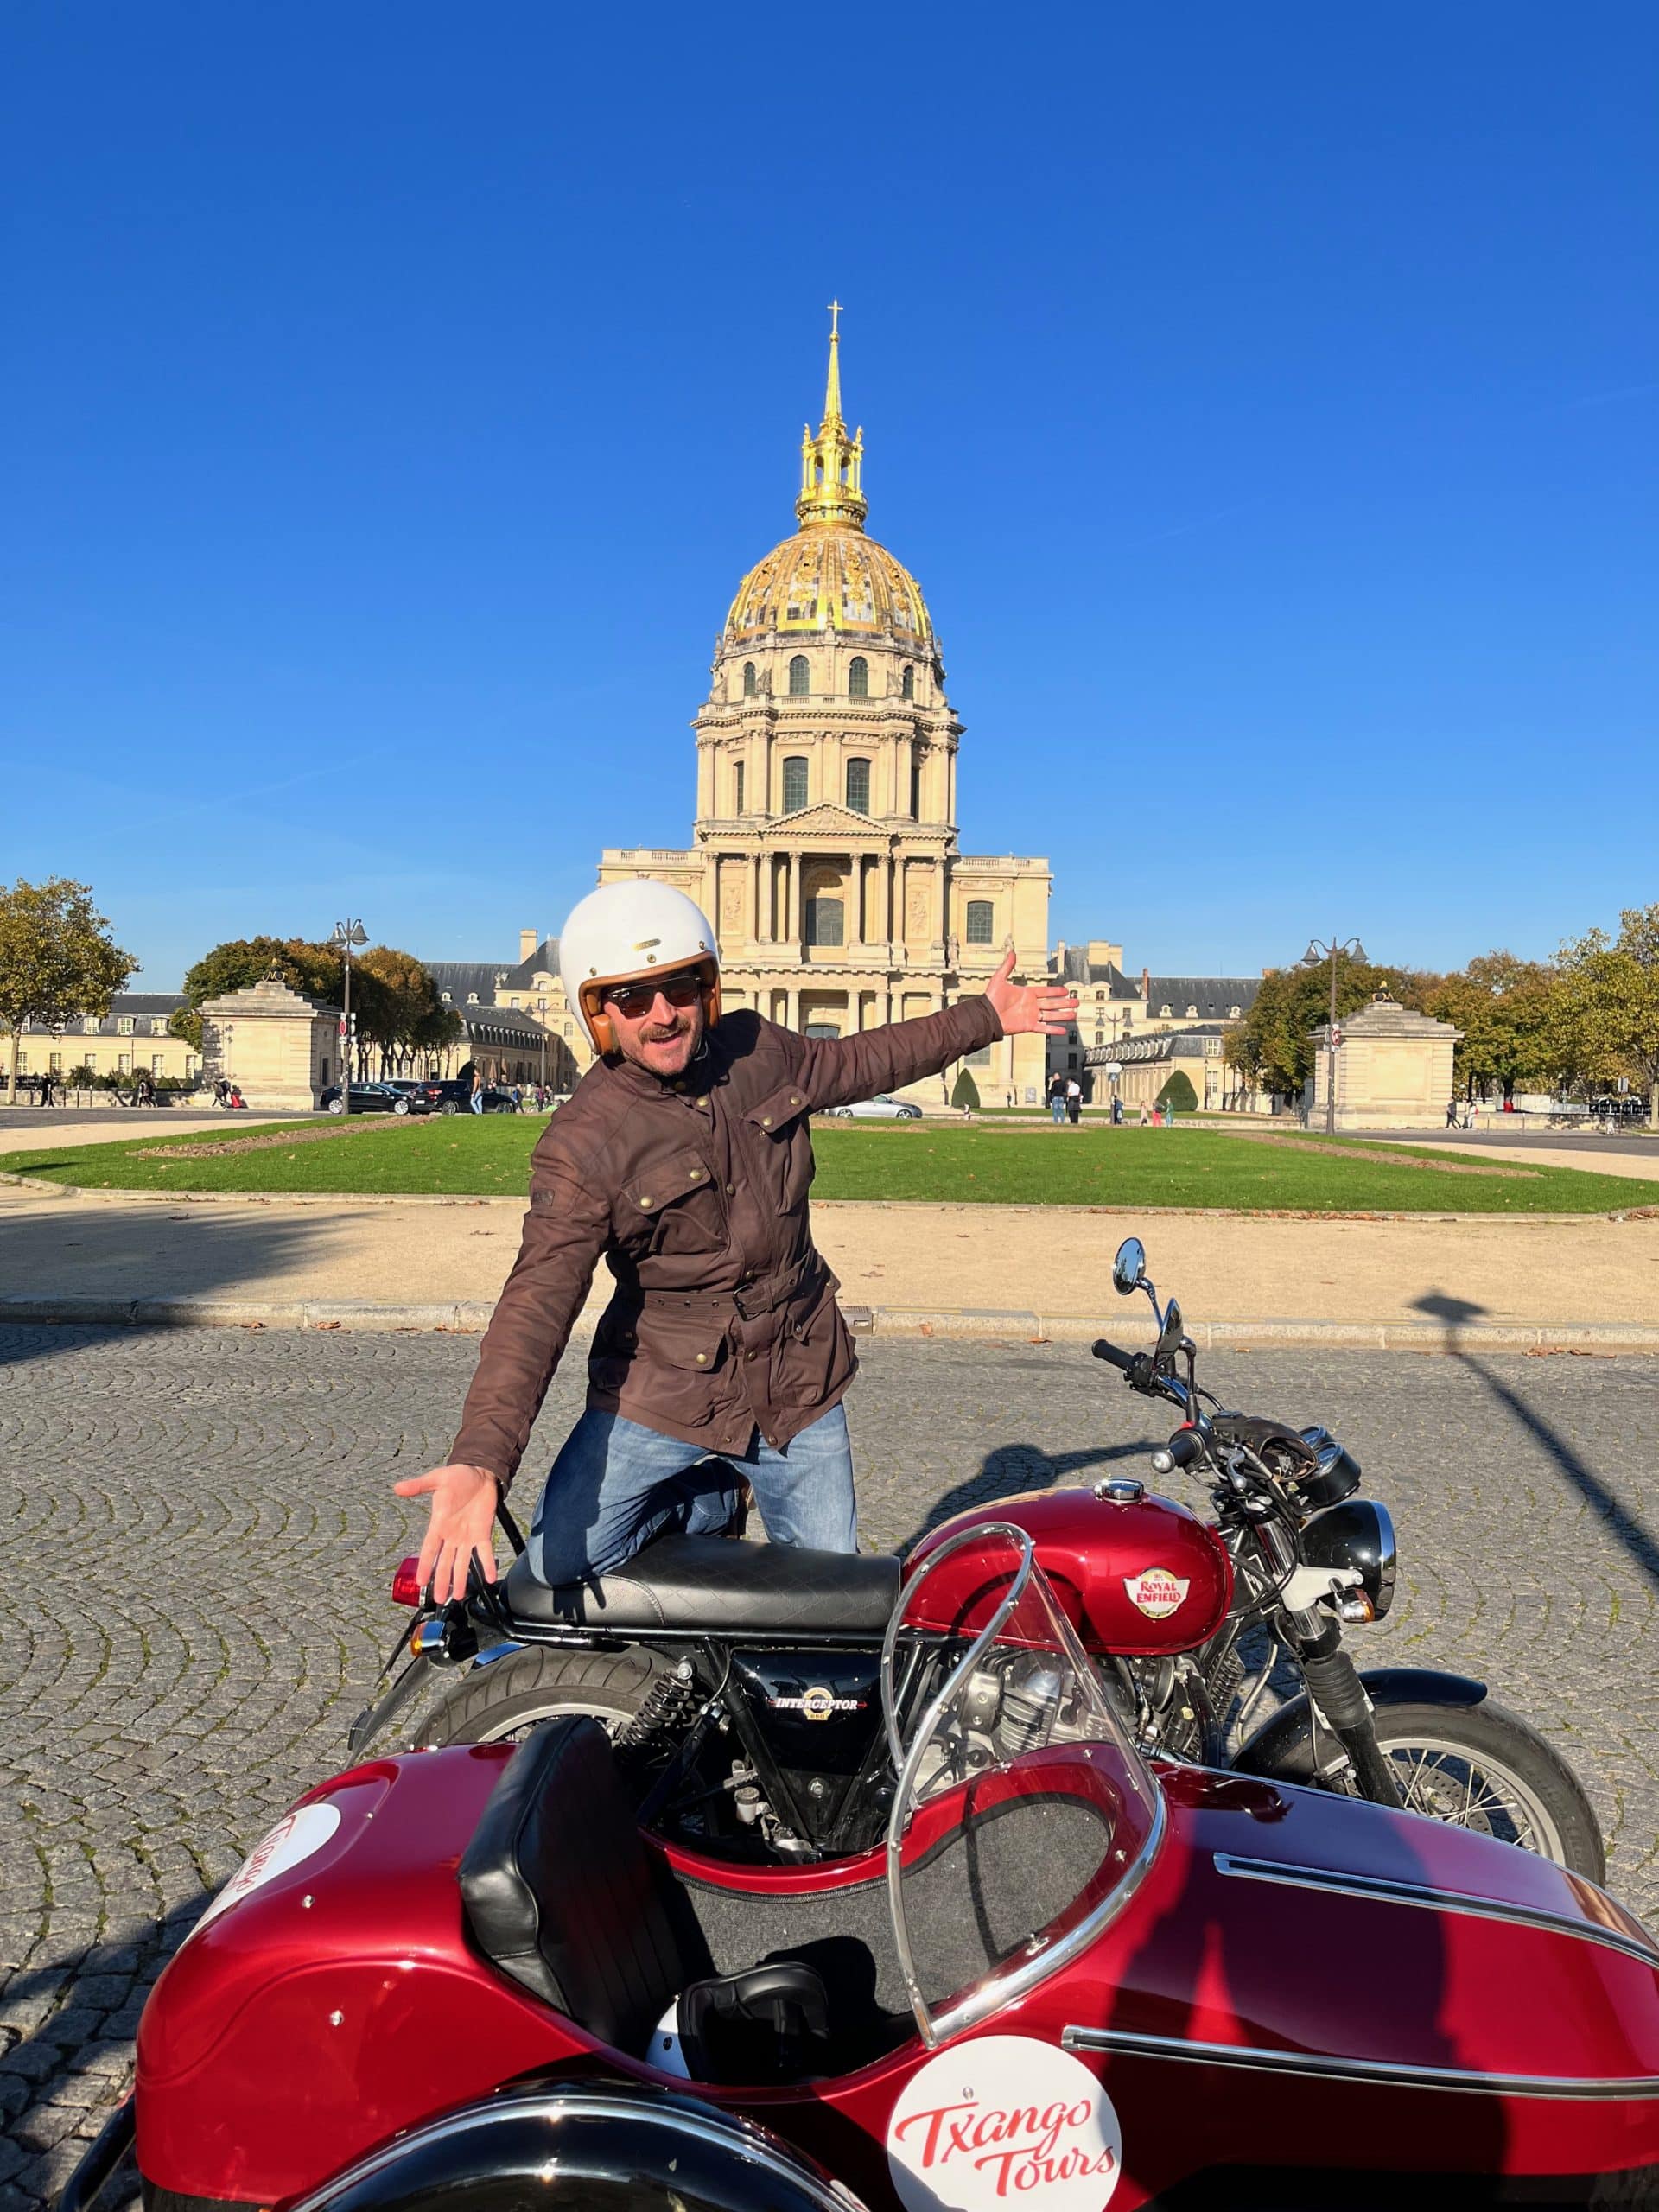 Presenting the sidecar motorcycle at Napoleon's Tomb